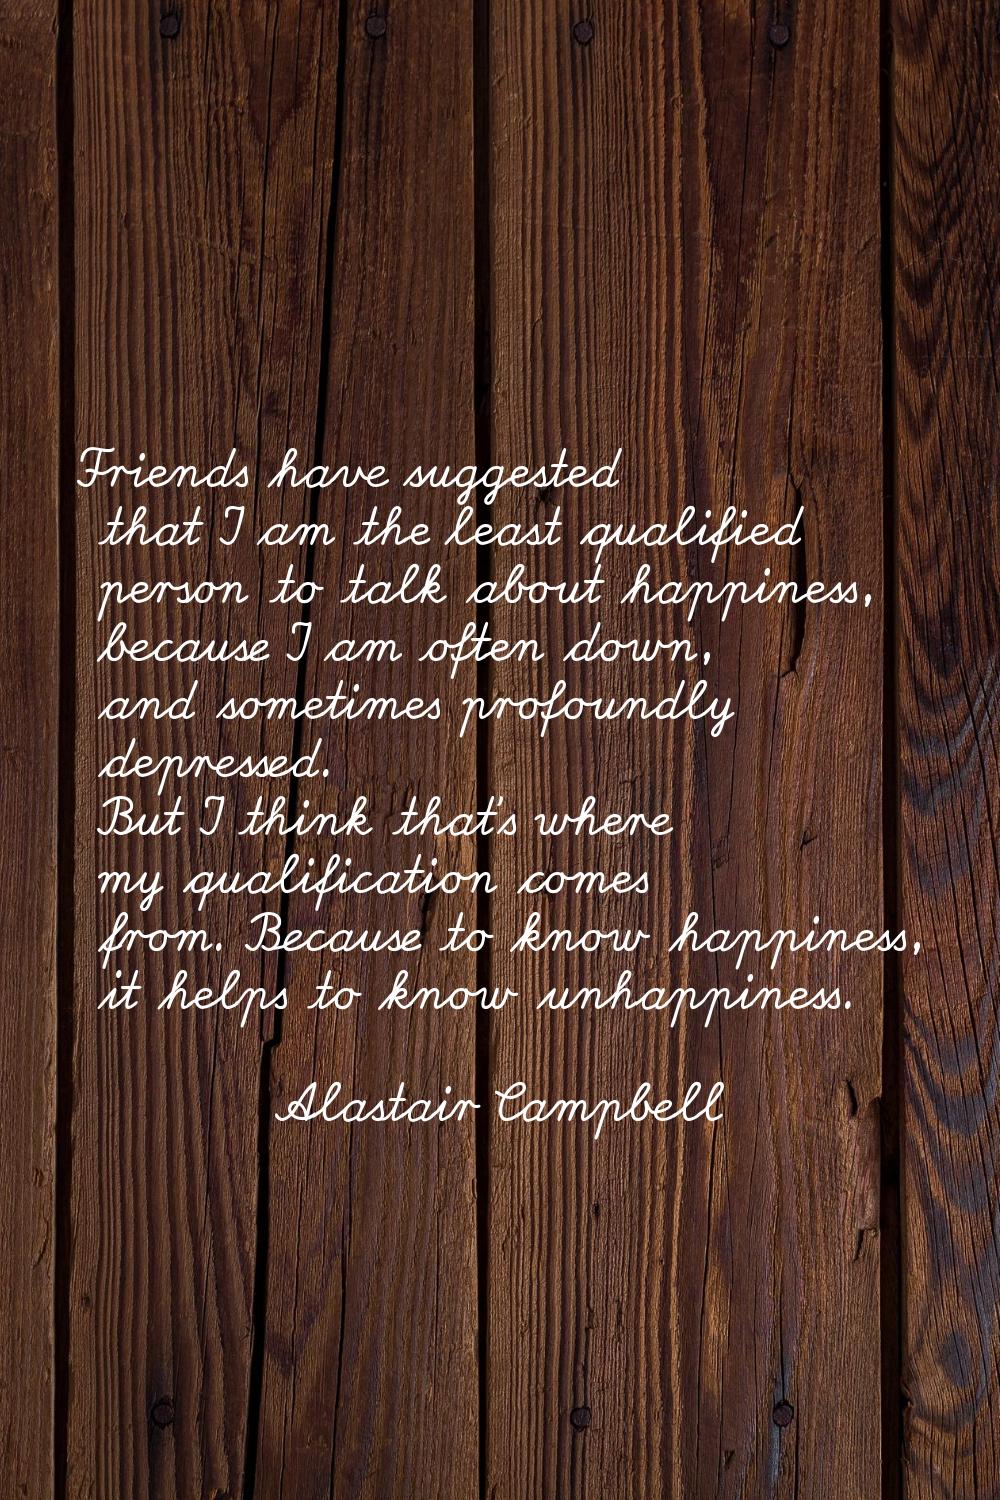 Friends have suggested that I am the least qualified person to talk about happiness, because I am o